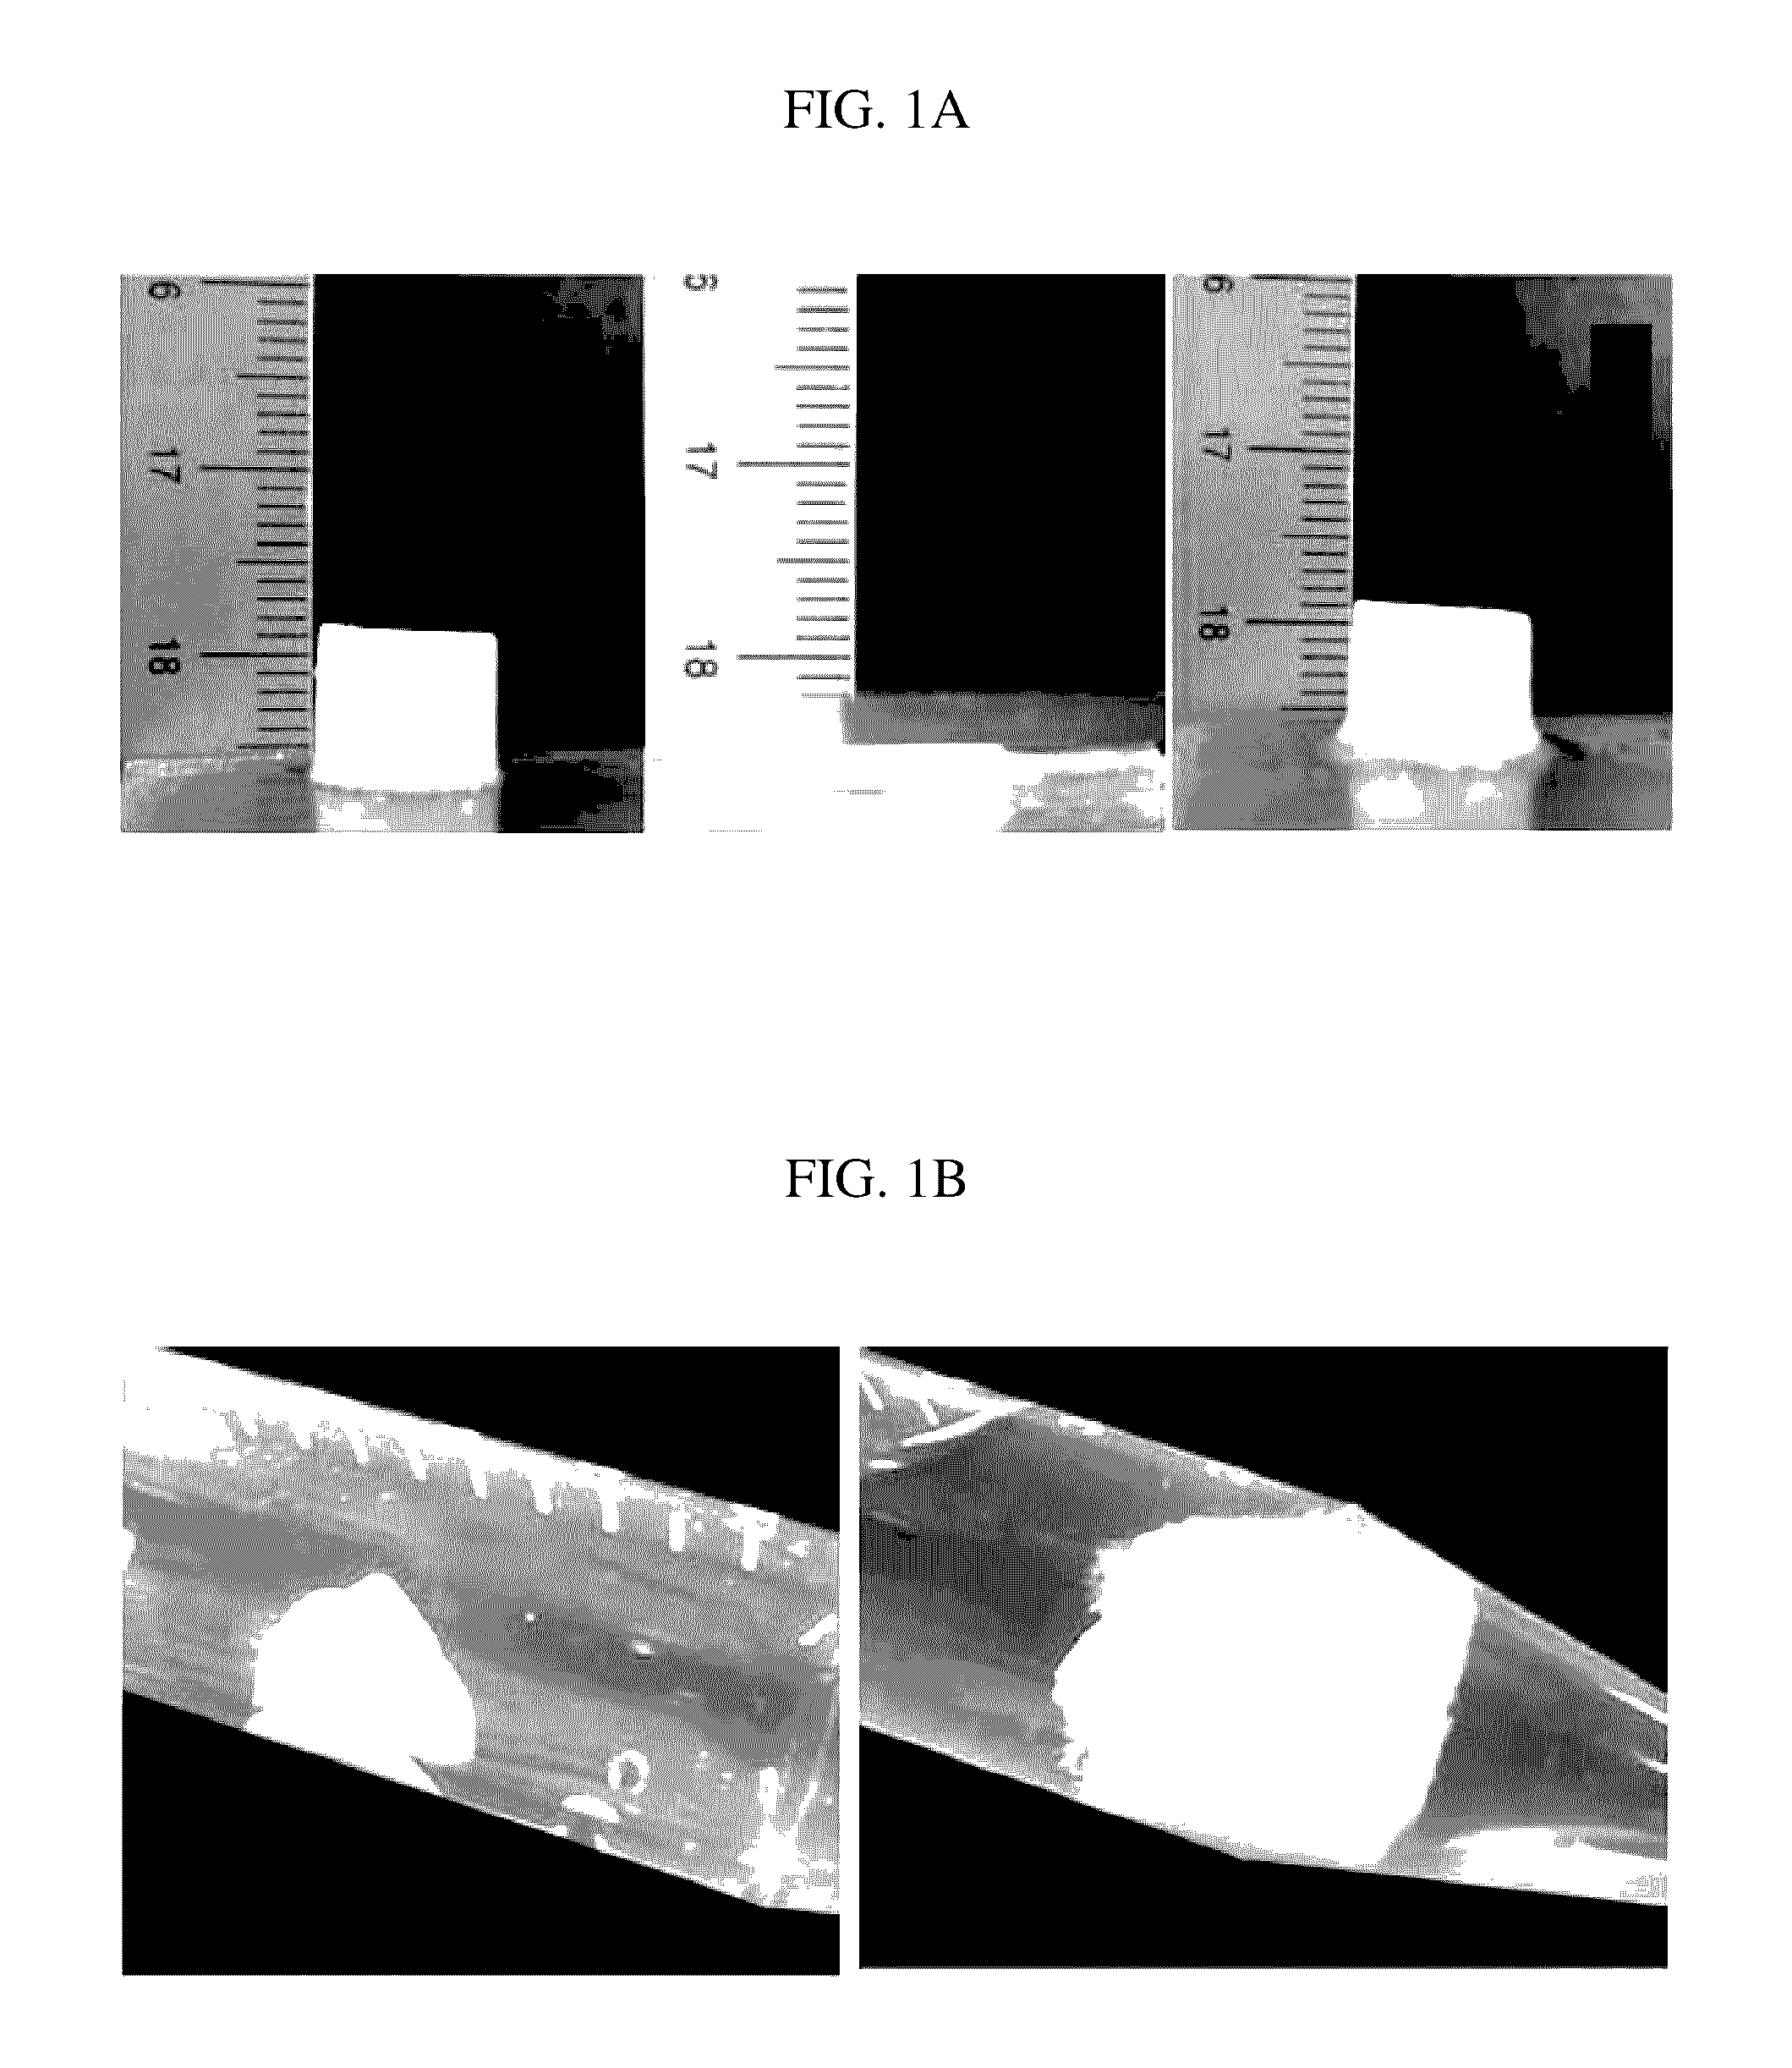 Hybrid hollow microcapsule, scaffold for soft tissue including same, and methods of preparing same